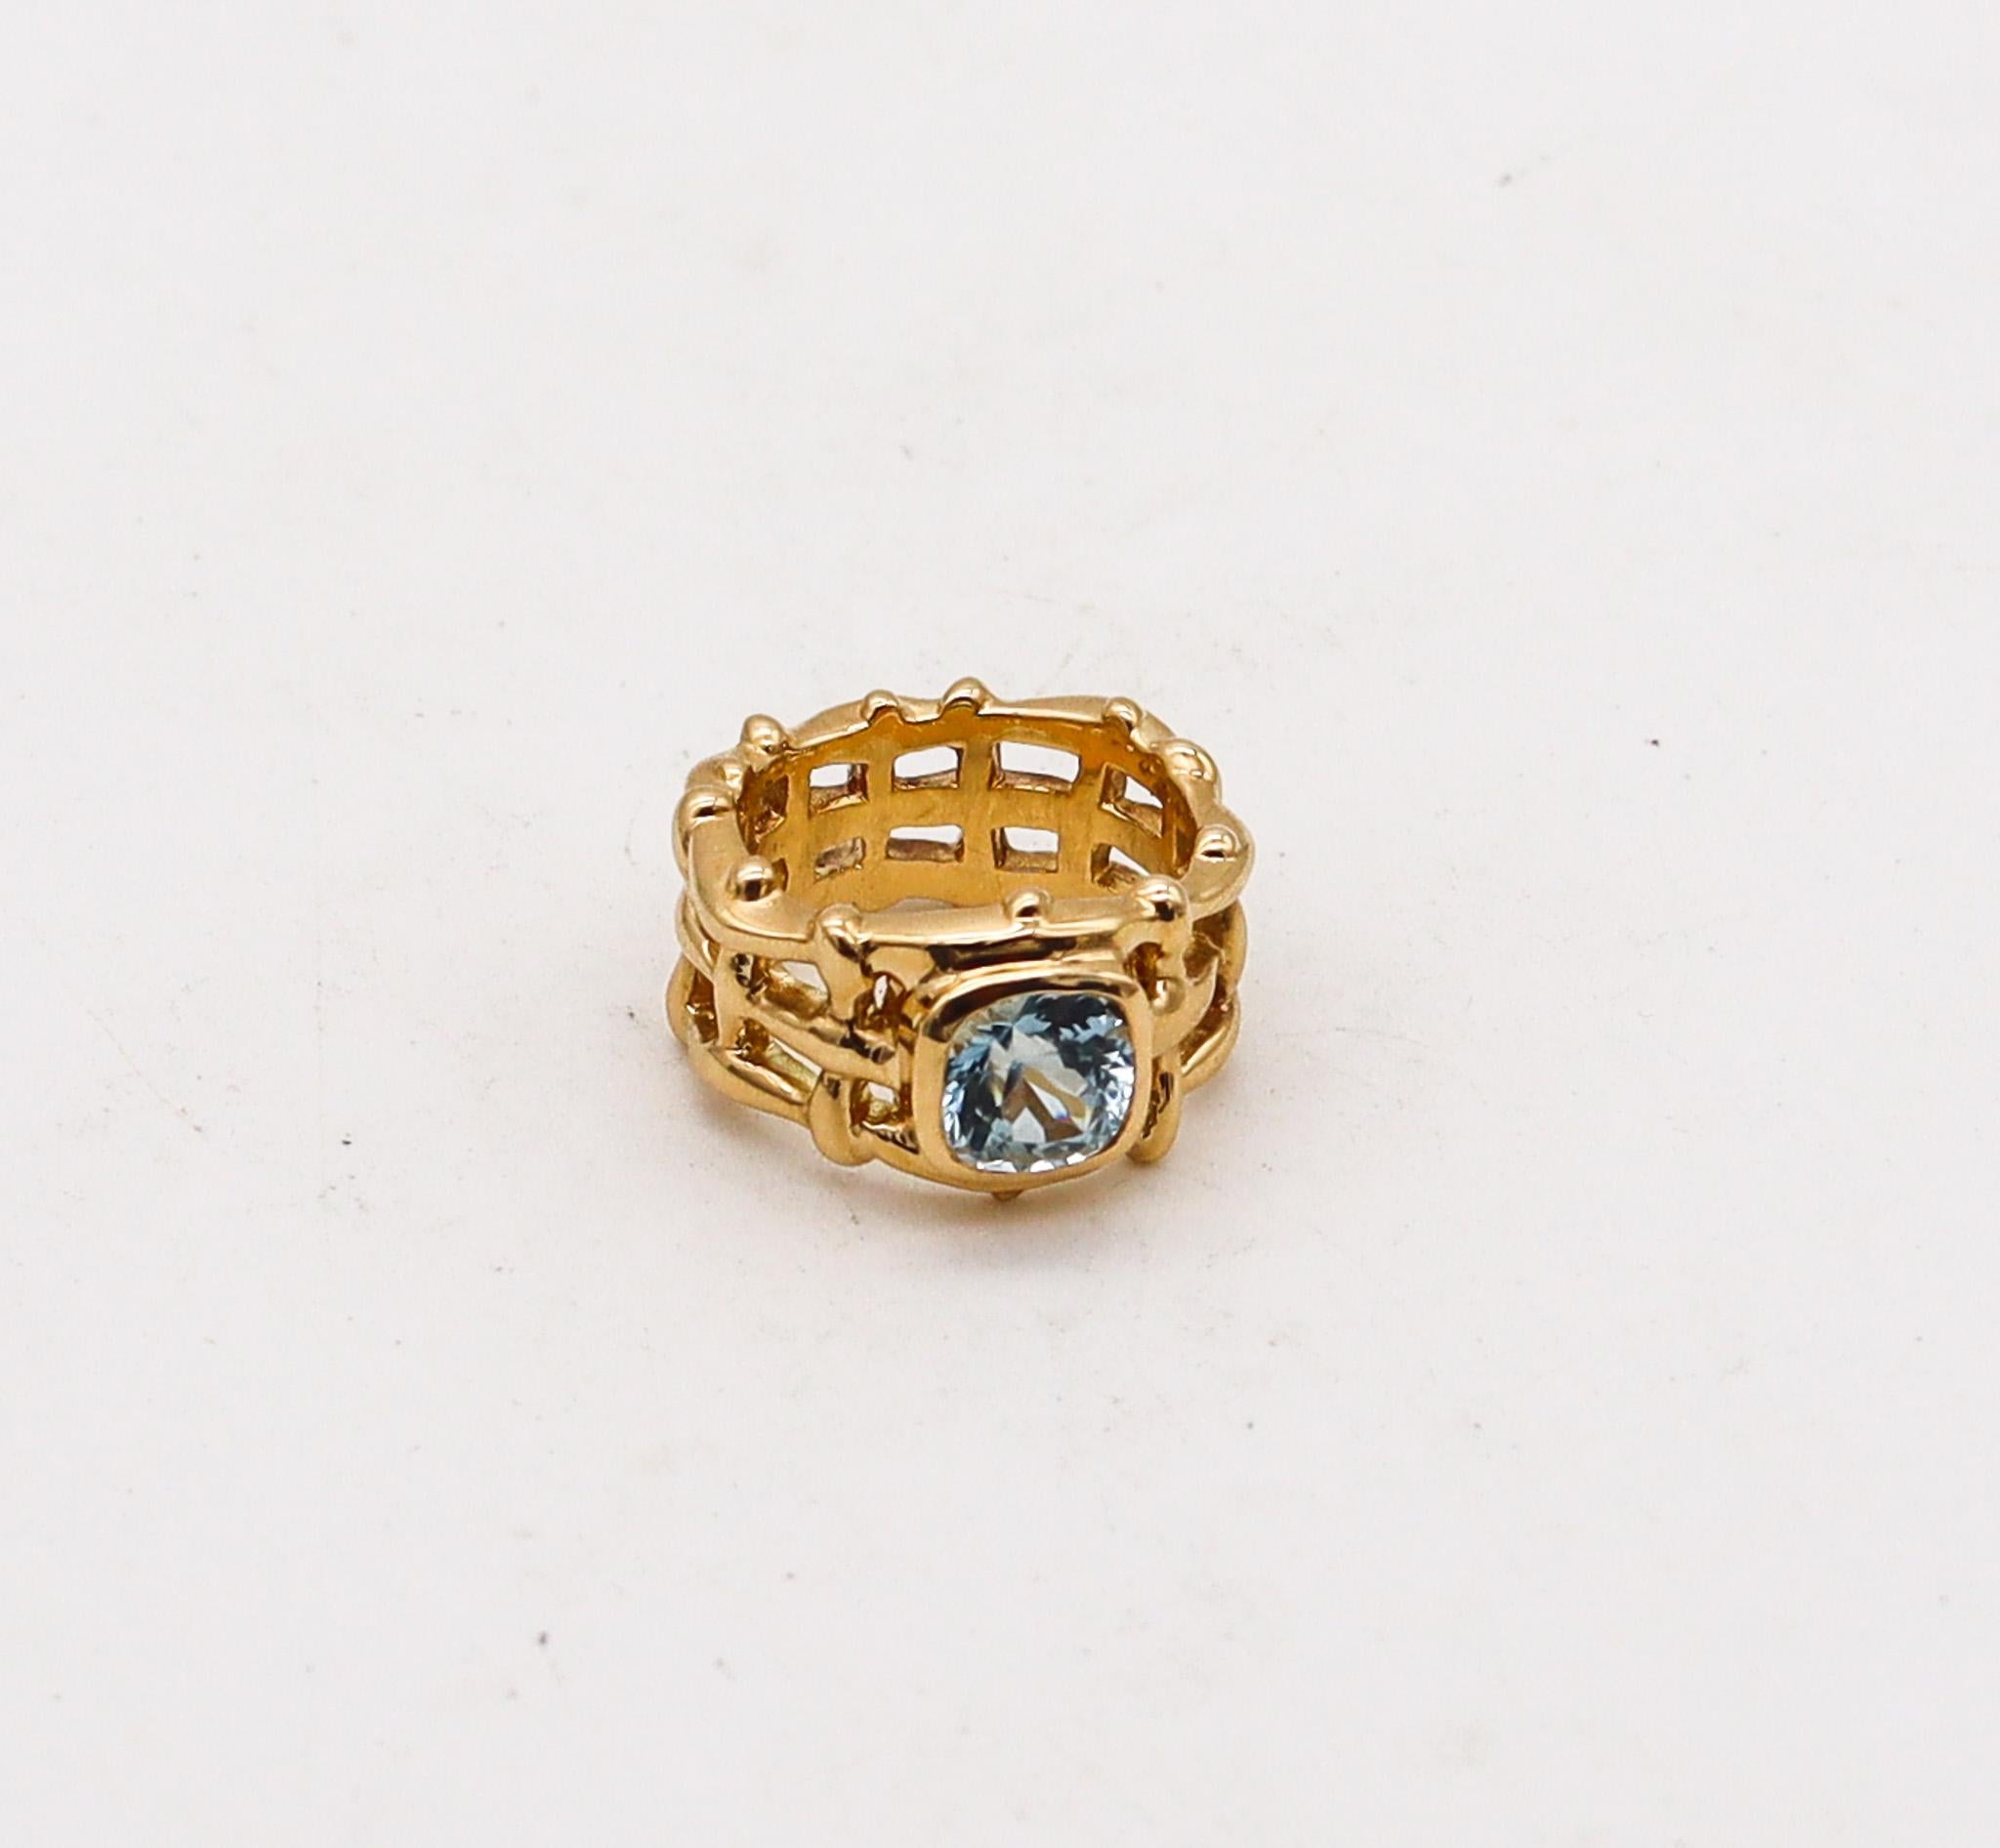 Cushion Cut Angela Cummings Studios Cocktail Ring In 18Kt Gold With 2.32 Cts Aquamarine For Sale